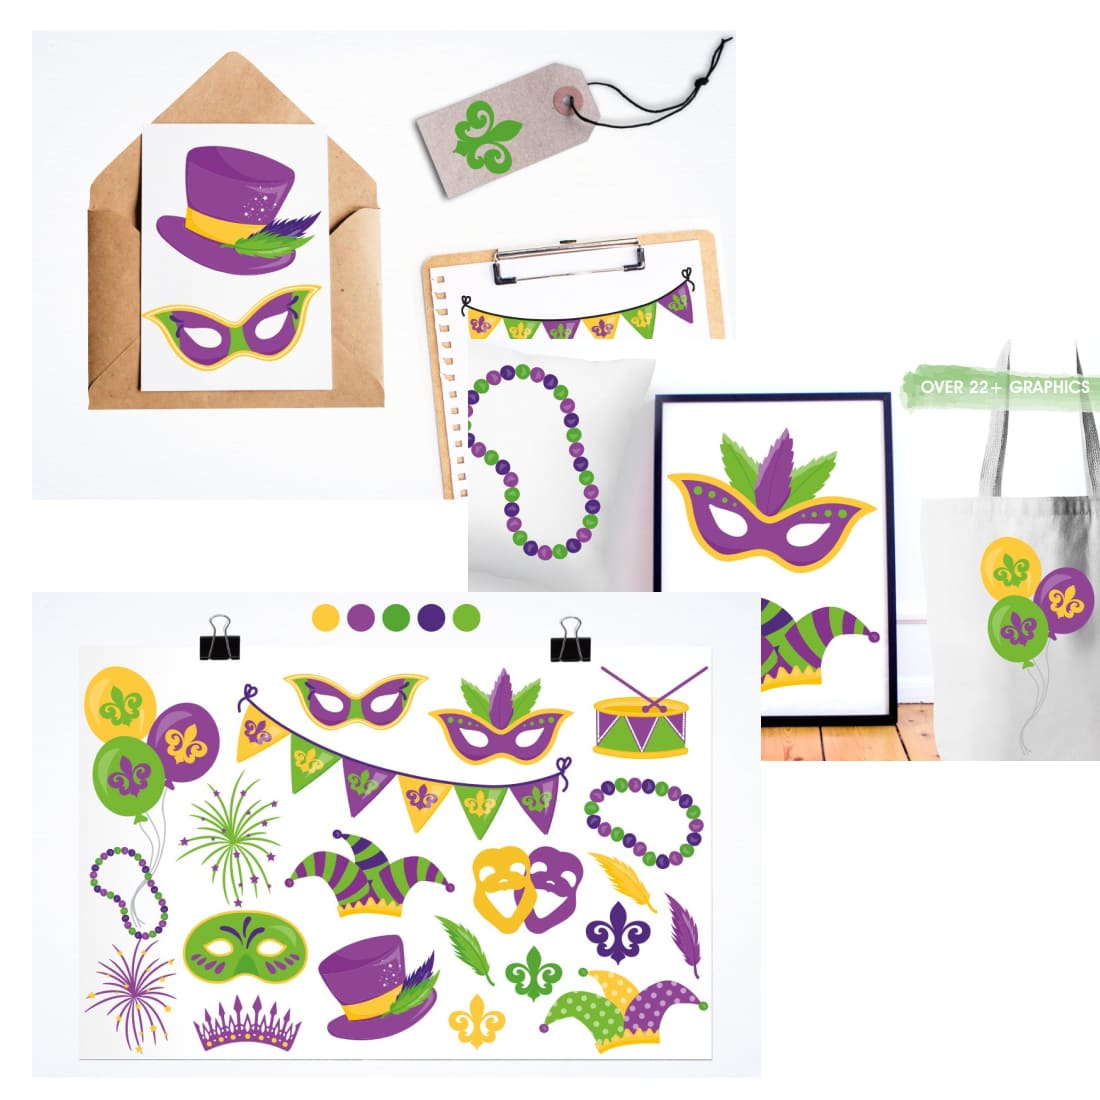 Examples of using Mardi Gras icons.